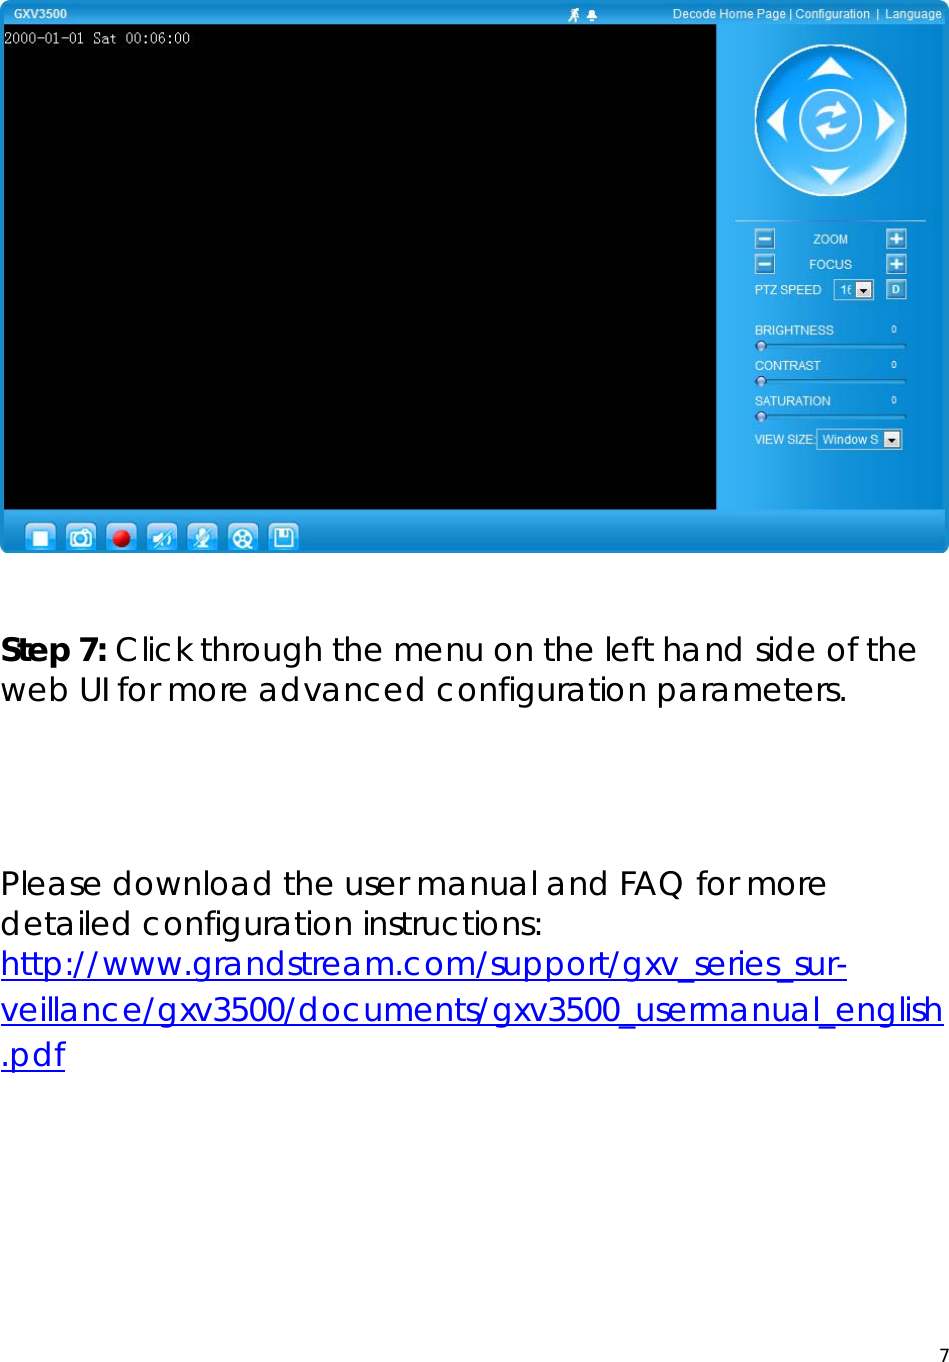  7   Step 7: Click through the menu on the left hand side of the web UI for more advanced configuration parameters.    Please download the user manual and FAQ for more detailed configuration instructions: http://www.grandstream.com/support/gxv_series_sur-veillance/gxv3500/documents/gxv3500_usermanual_english.pdf     